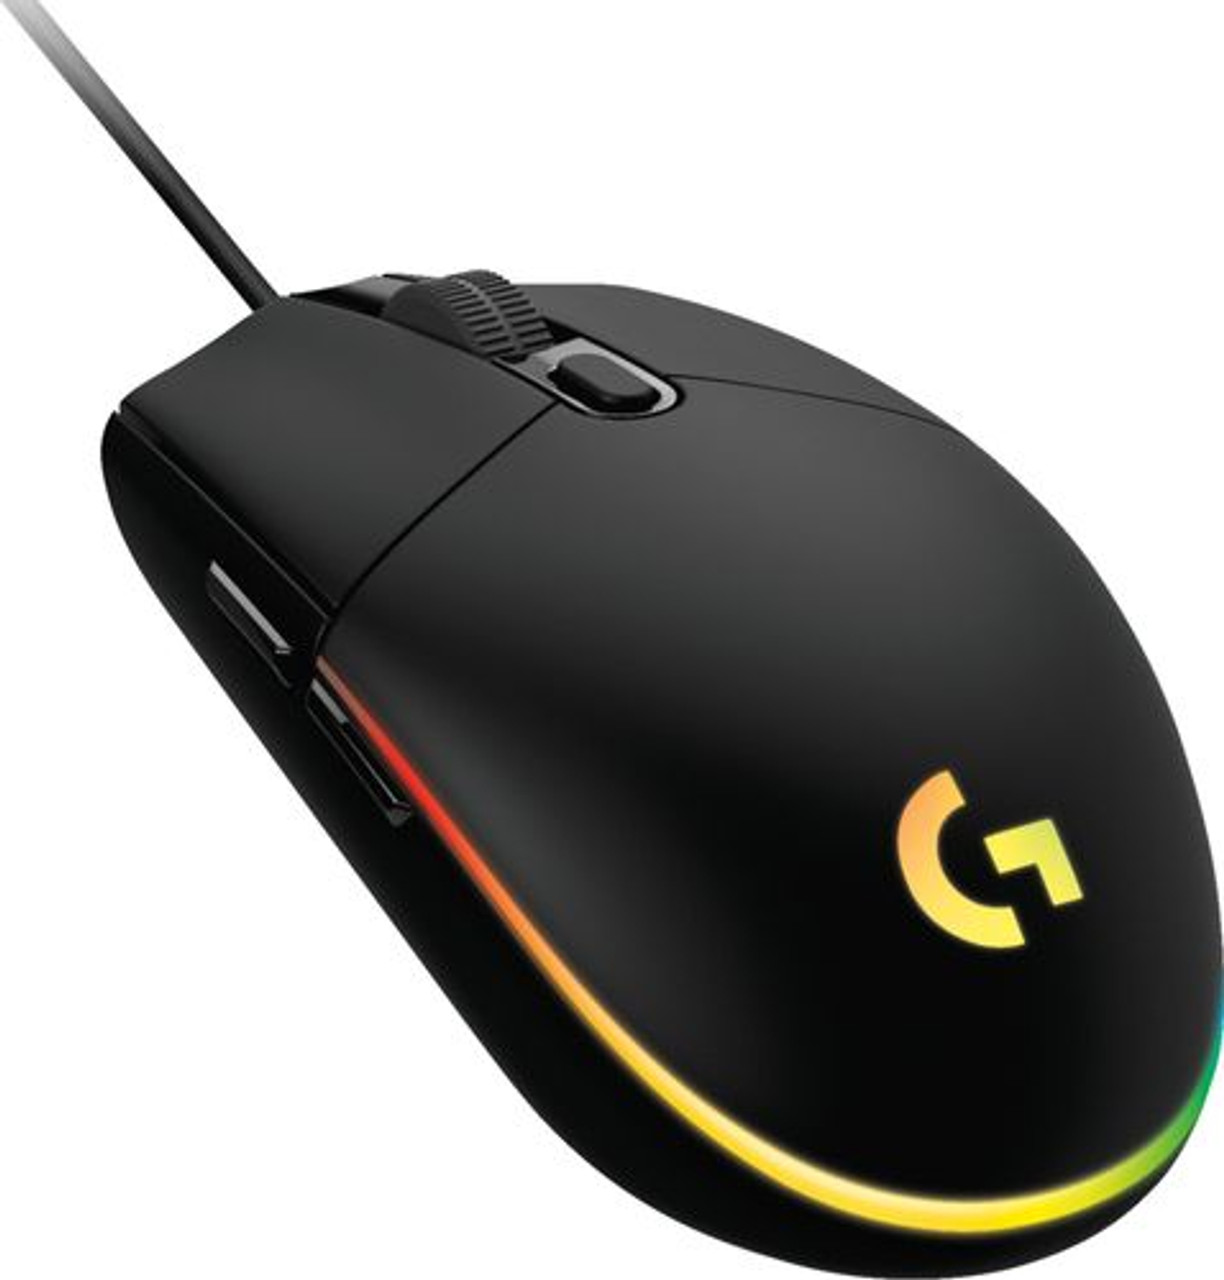 Logitech - G203 LIGHTSYNC Wired Optical Gaming Mouse - Black